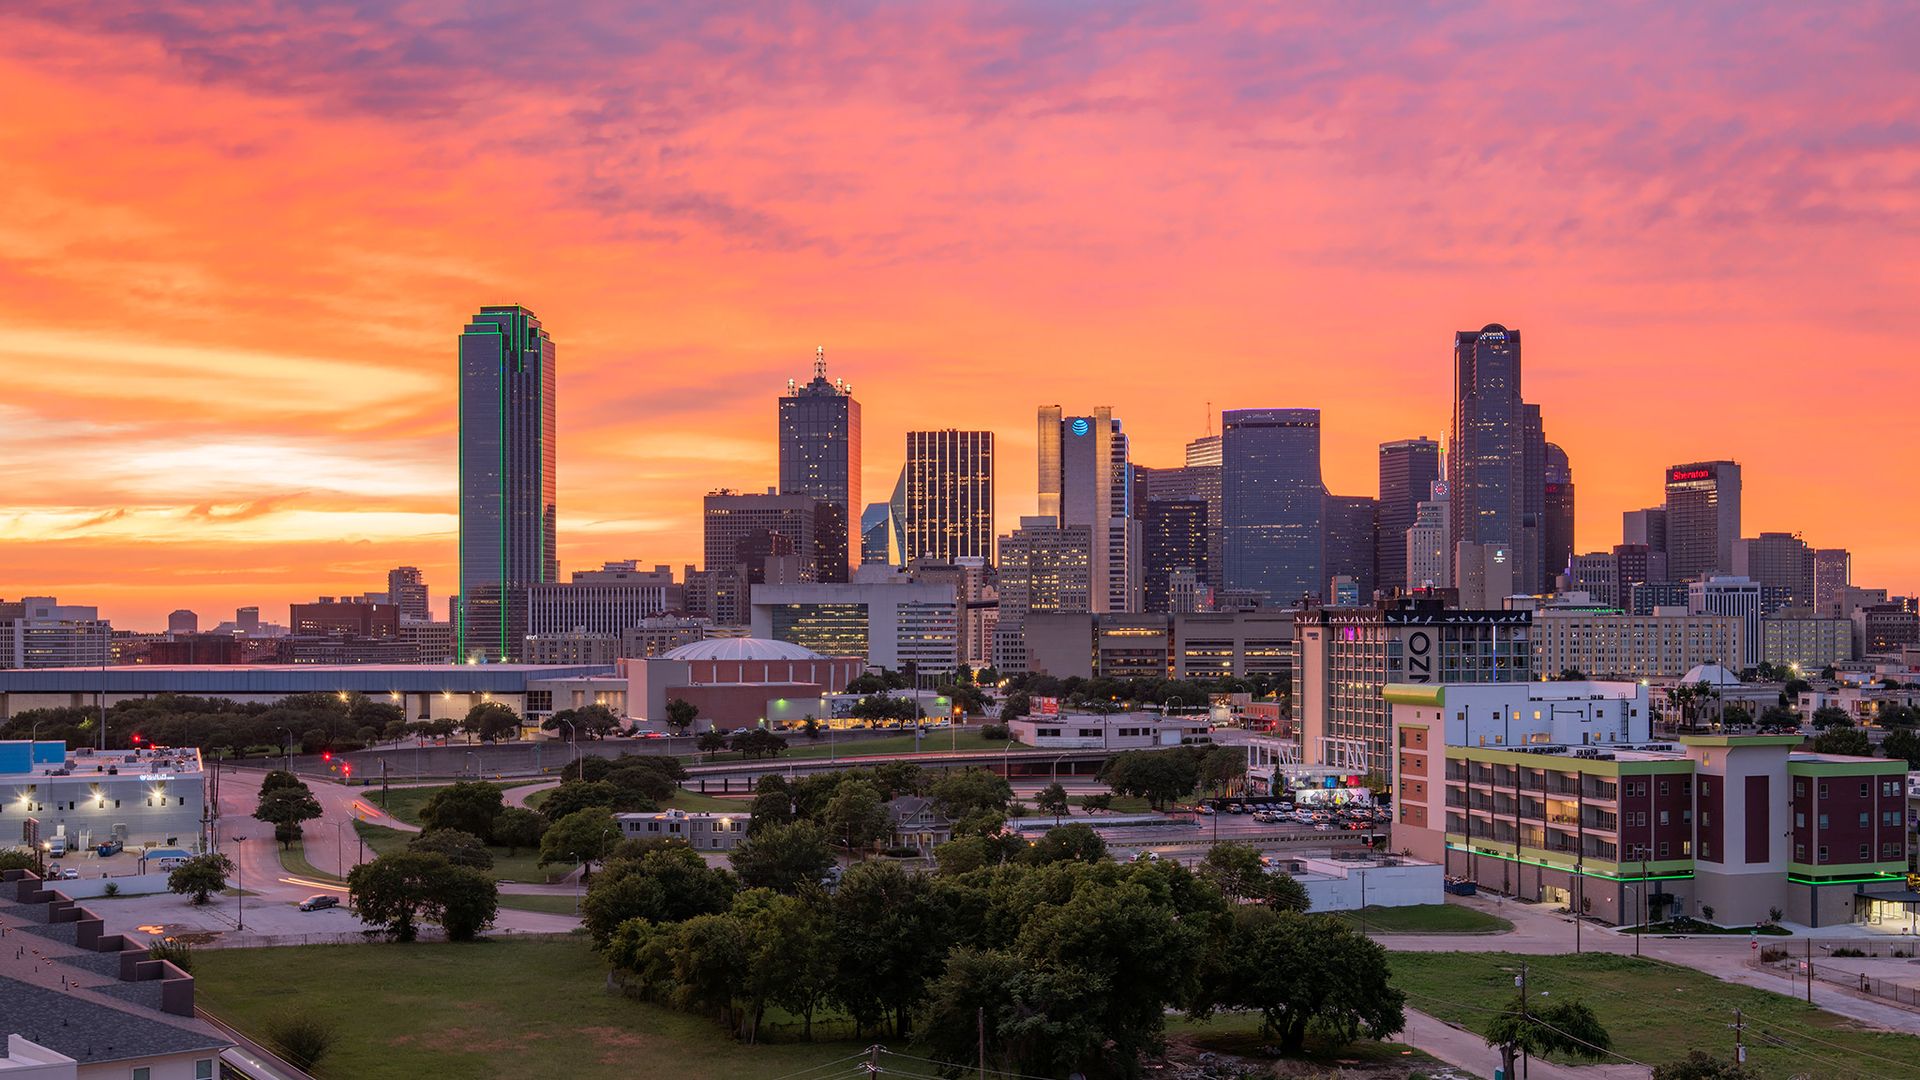 A beautiful sunset over downtown Dallas